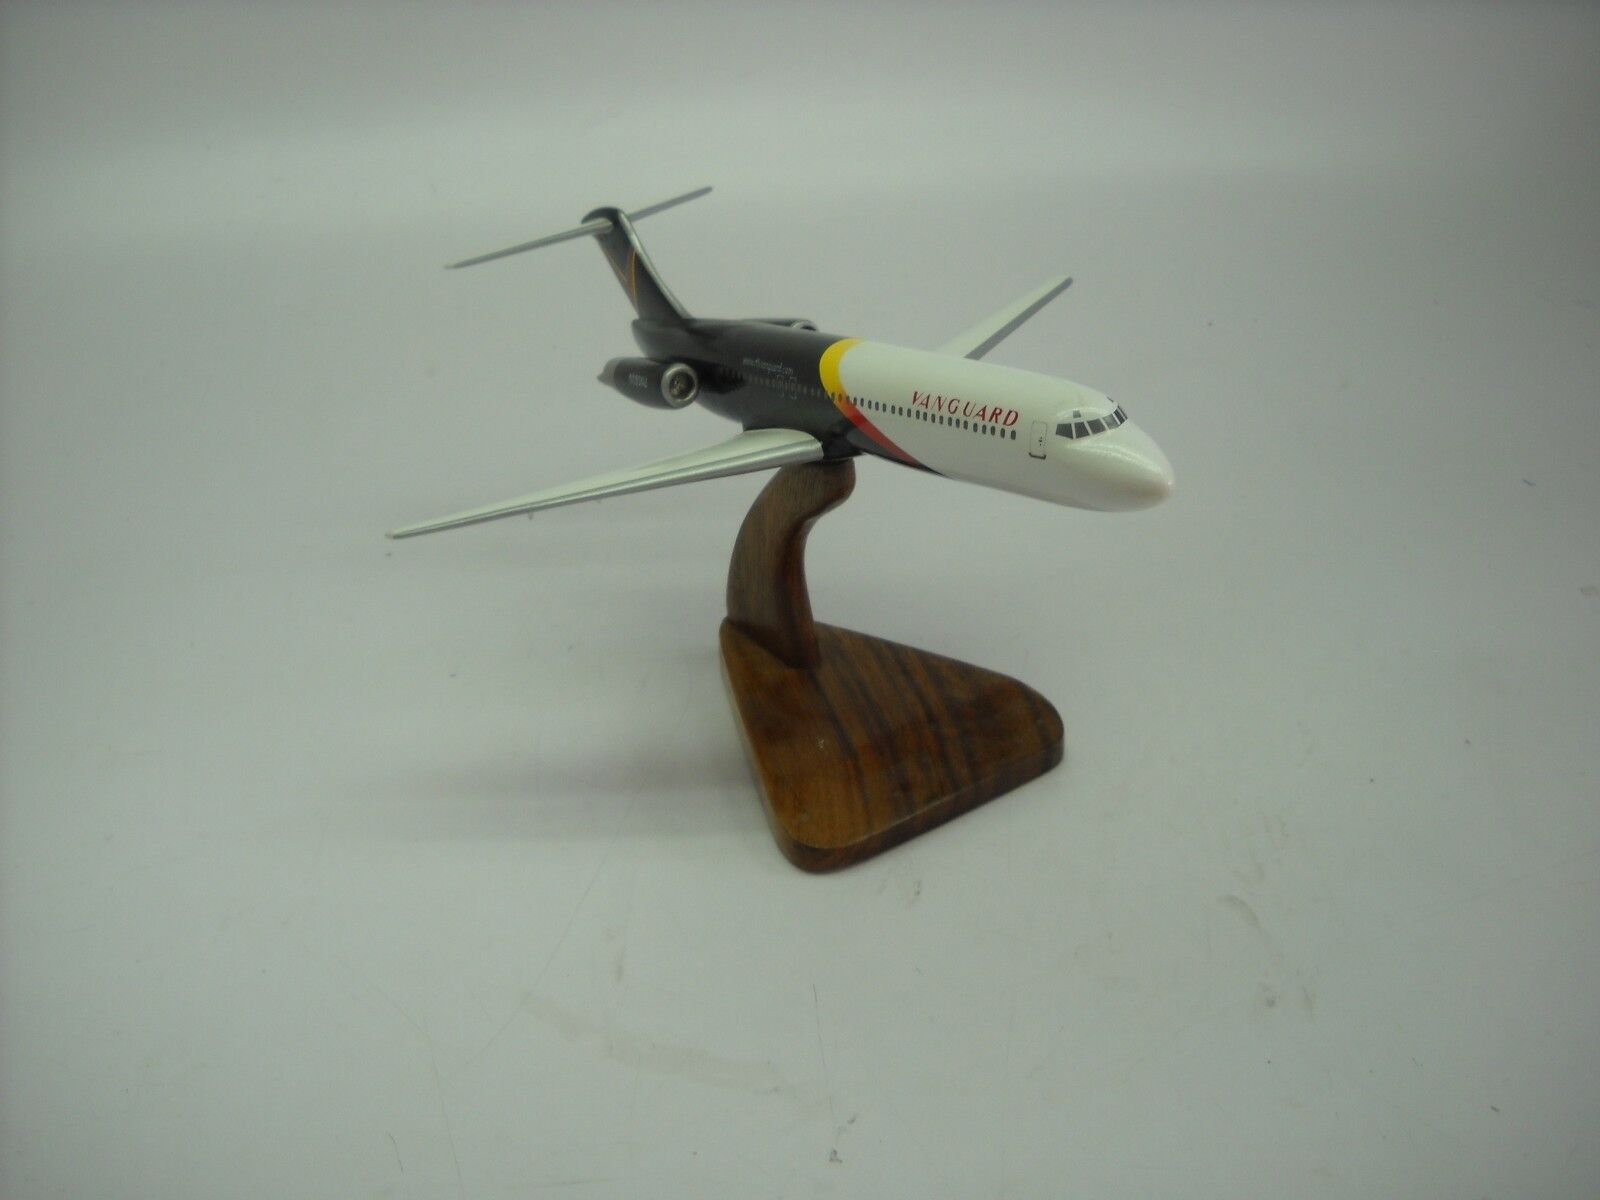 MD-82 Vanguard Jet Liner Airlines Aircraft Wood Model Small 